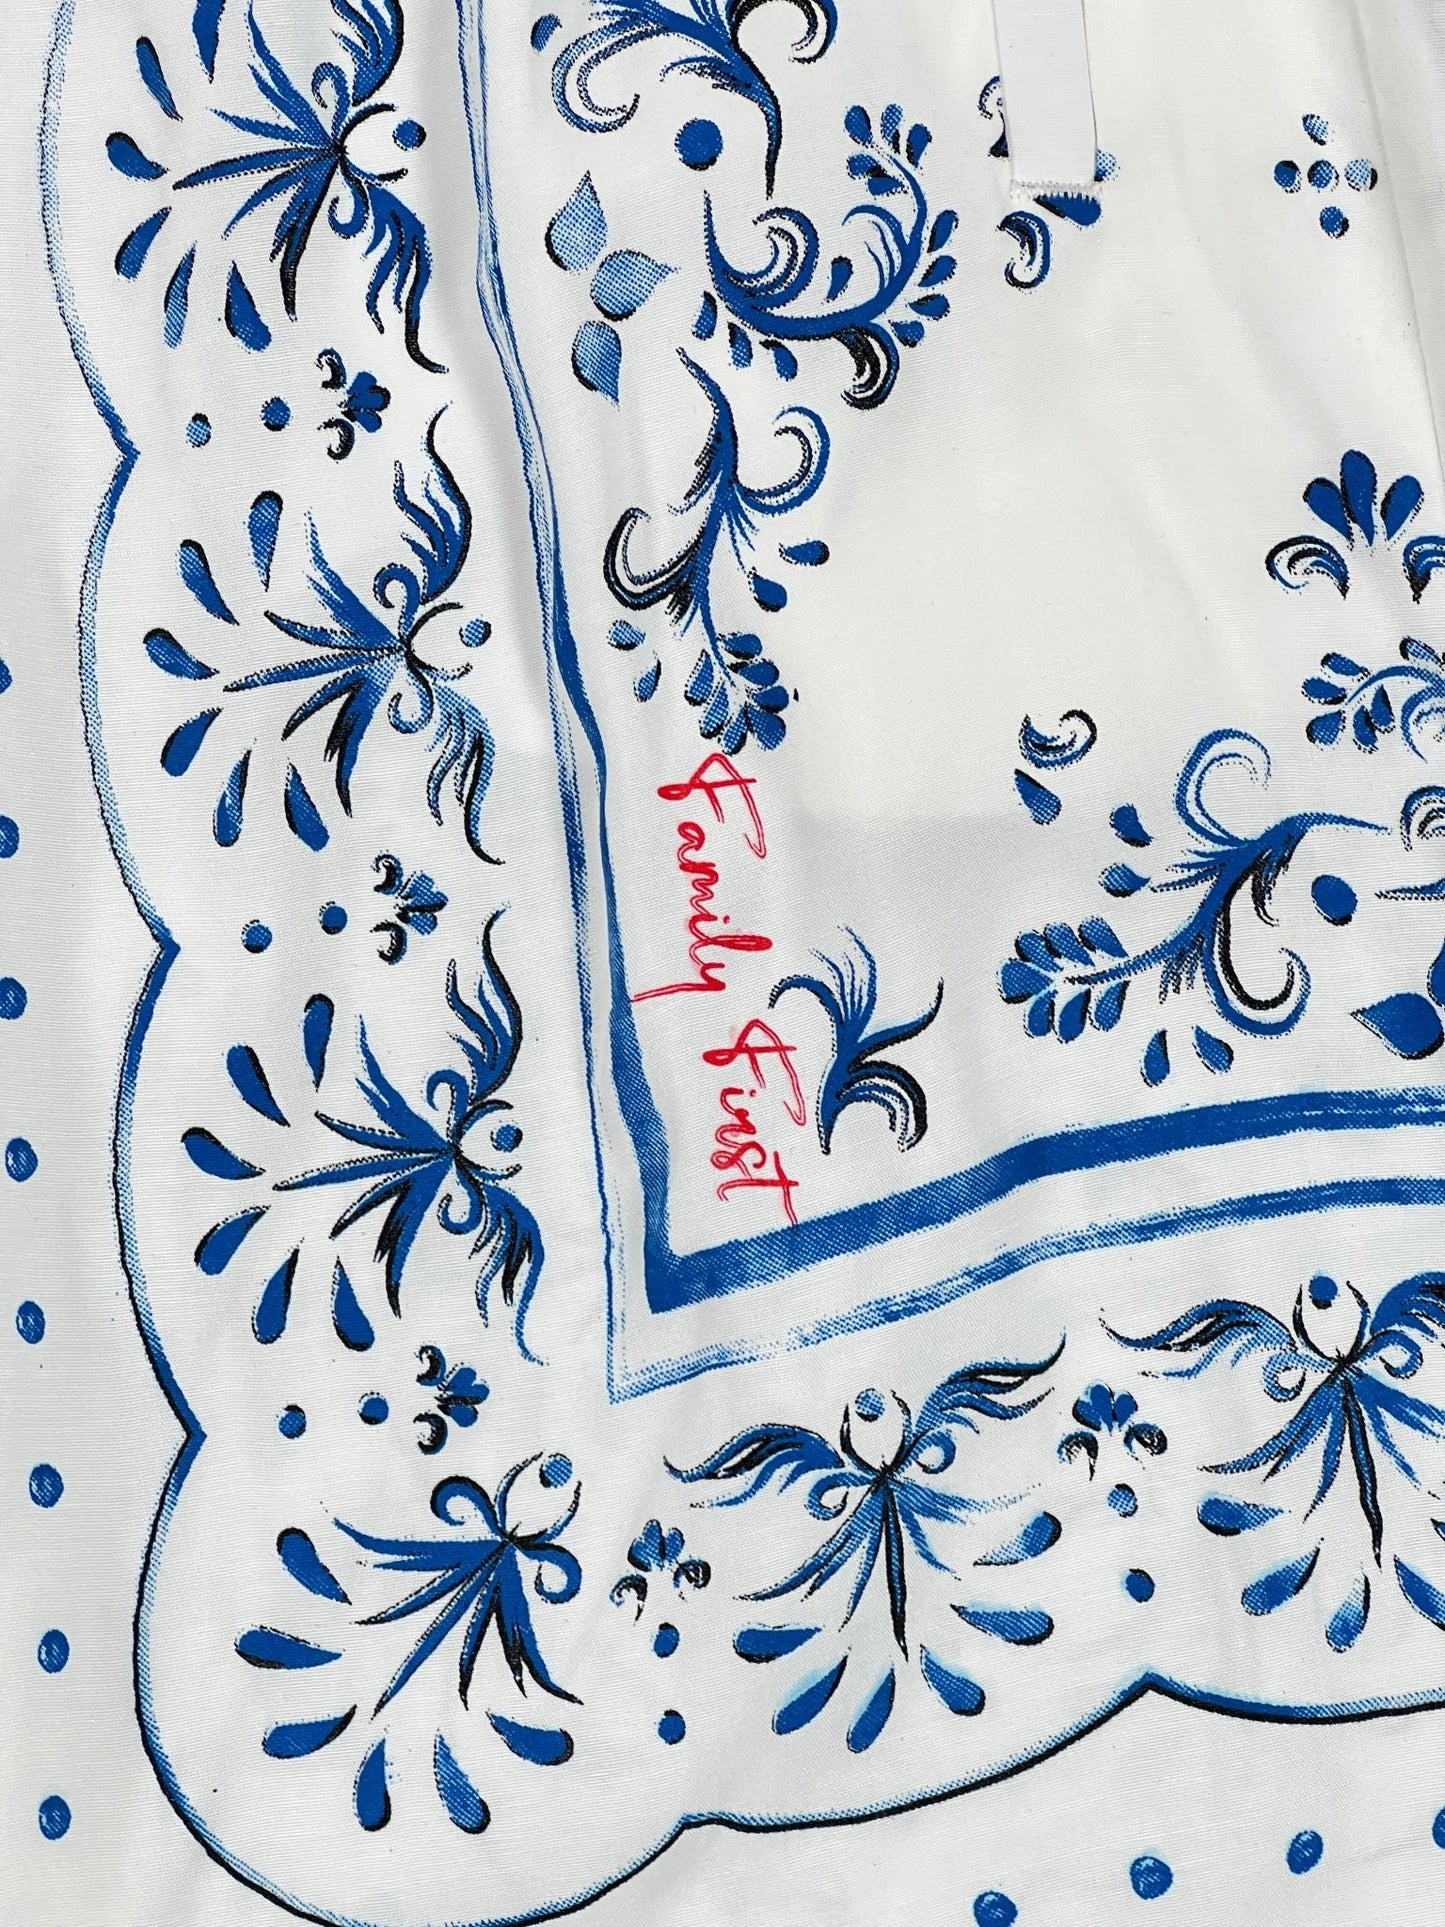 A FAMILY FIRST PSS2340 SHORT SICILY WHITE handkerchief with a floral pattern, made in Italy.